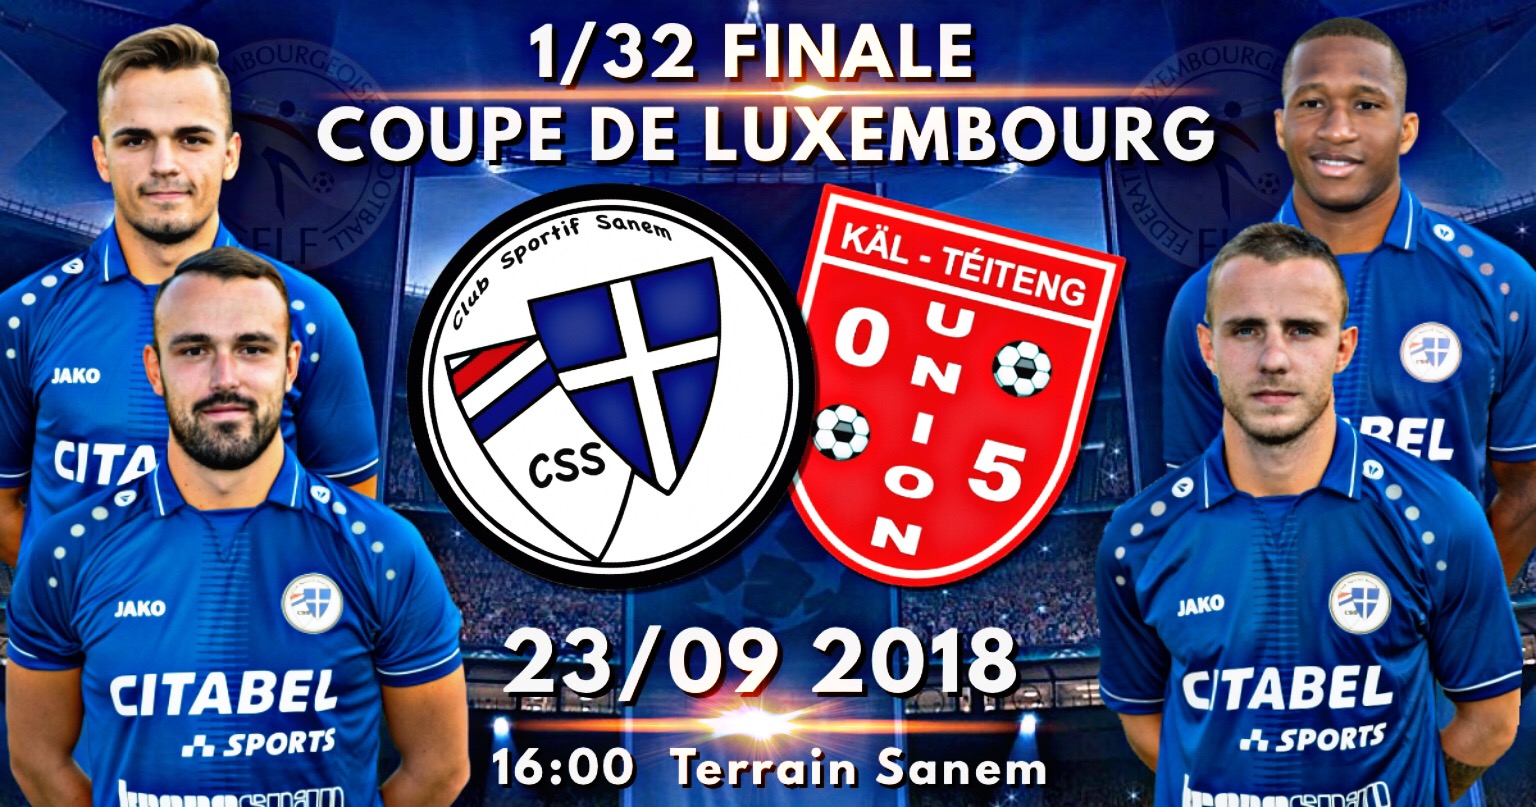 COUPE DE LUXEMBOURG